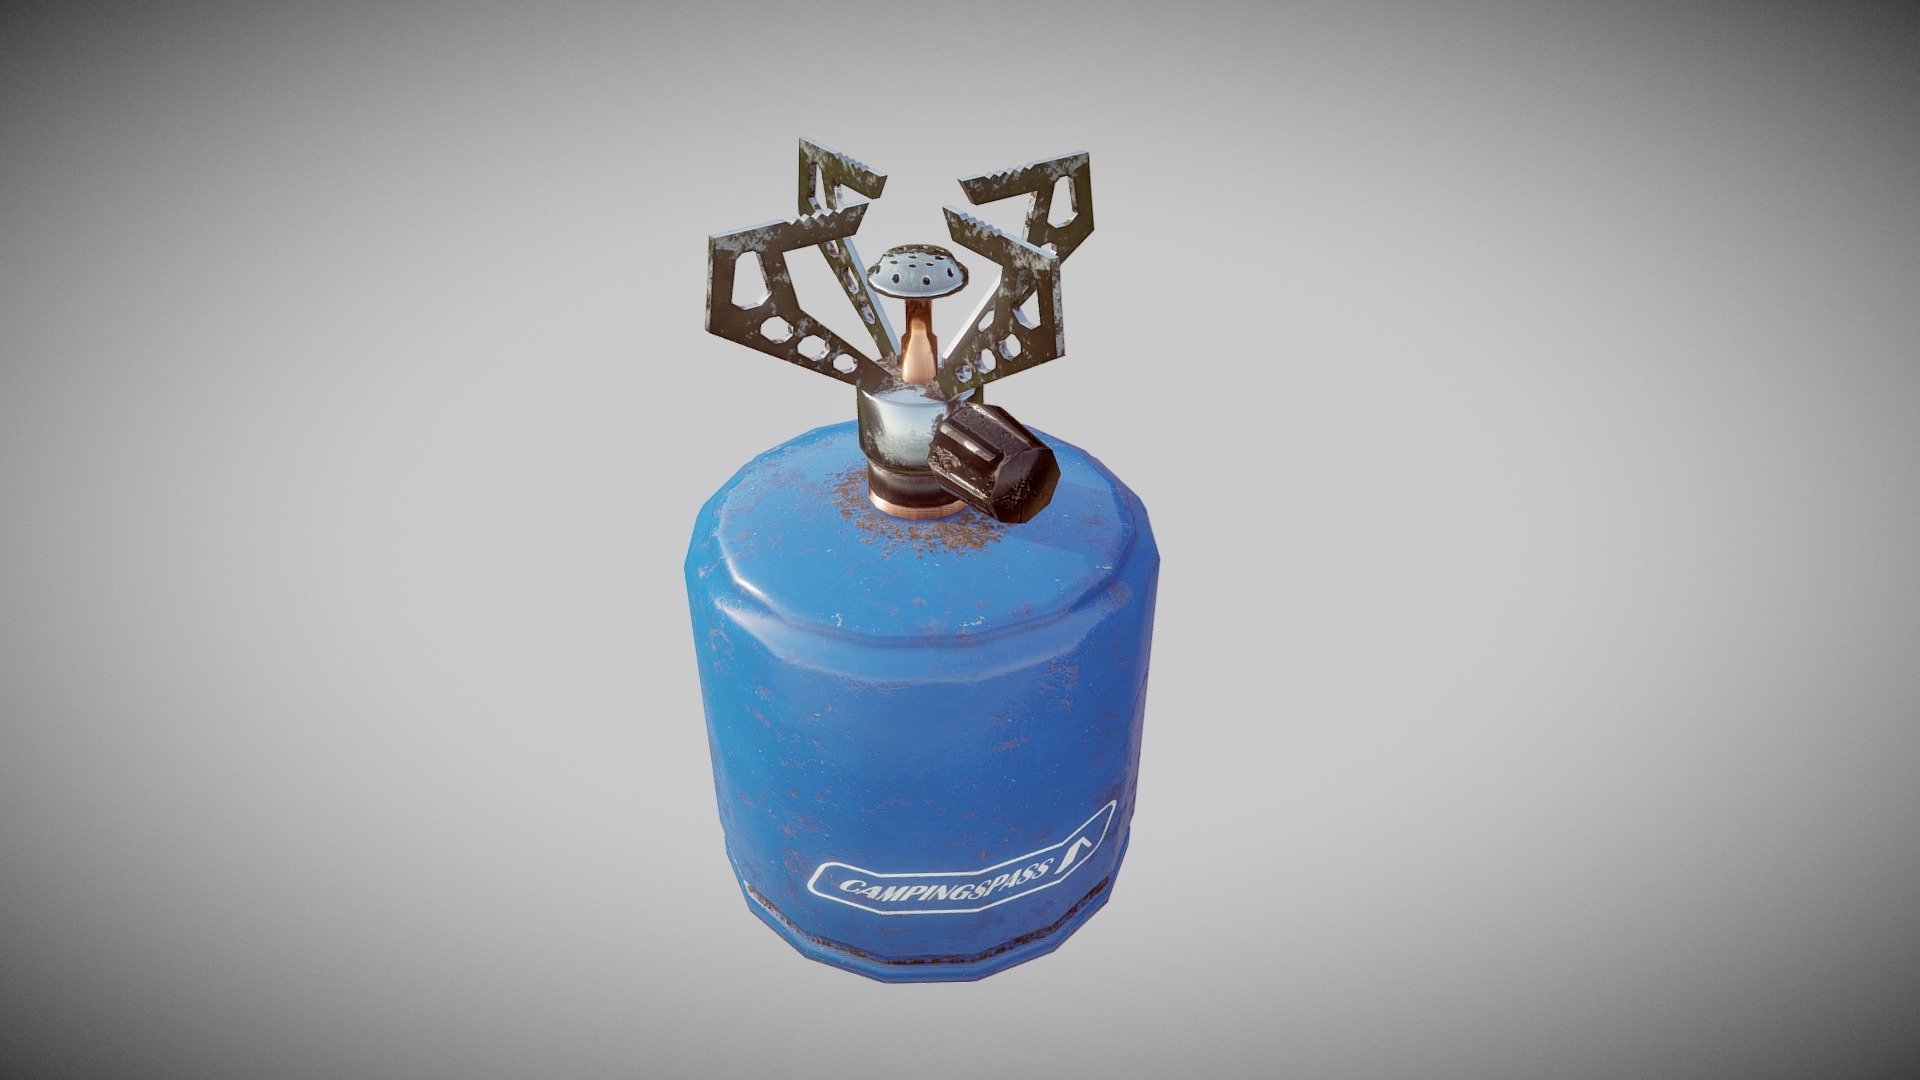 pbr based low poly 3d model of a camping gas stove for use at a camping site - camping gas stove - 3D model by kawetofe 3d model